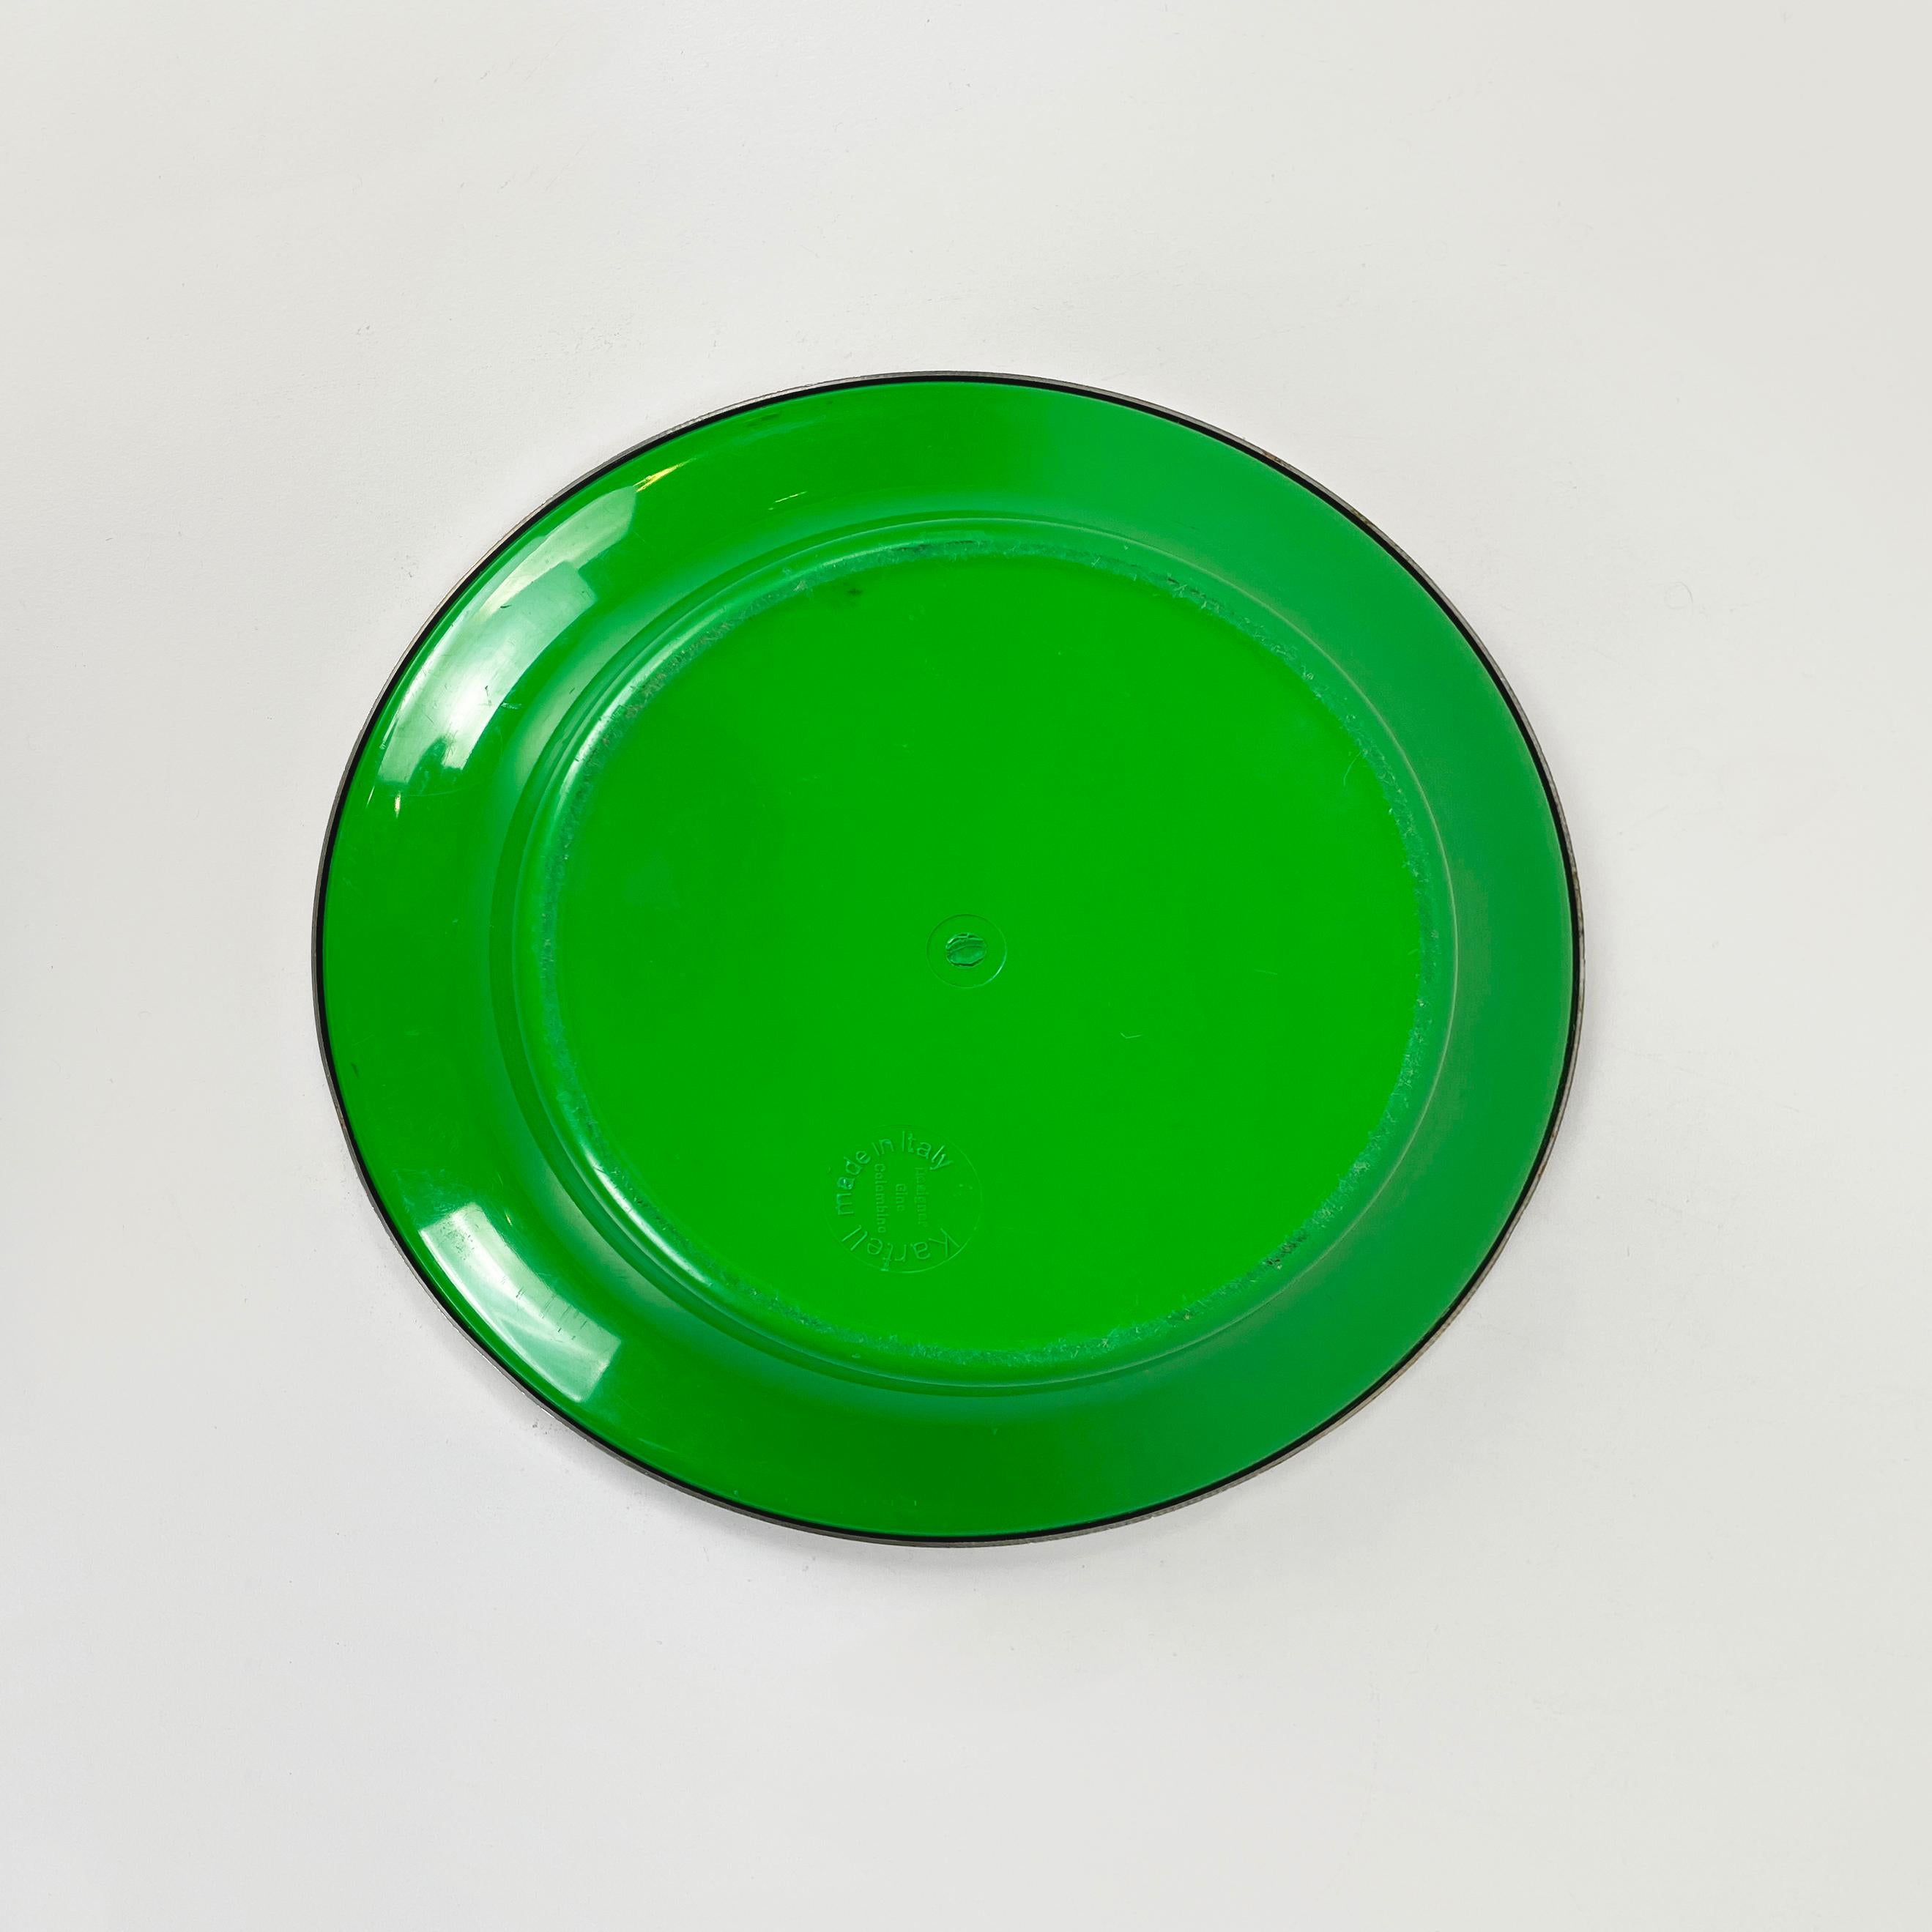 Italian modern Green plastic metal Ashtray by Gino Colombini for Kartell, 1970s For Sale 4